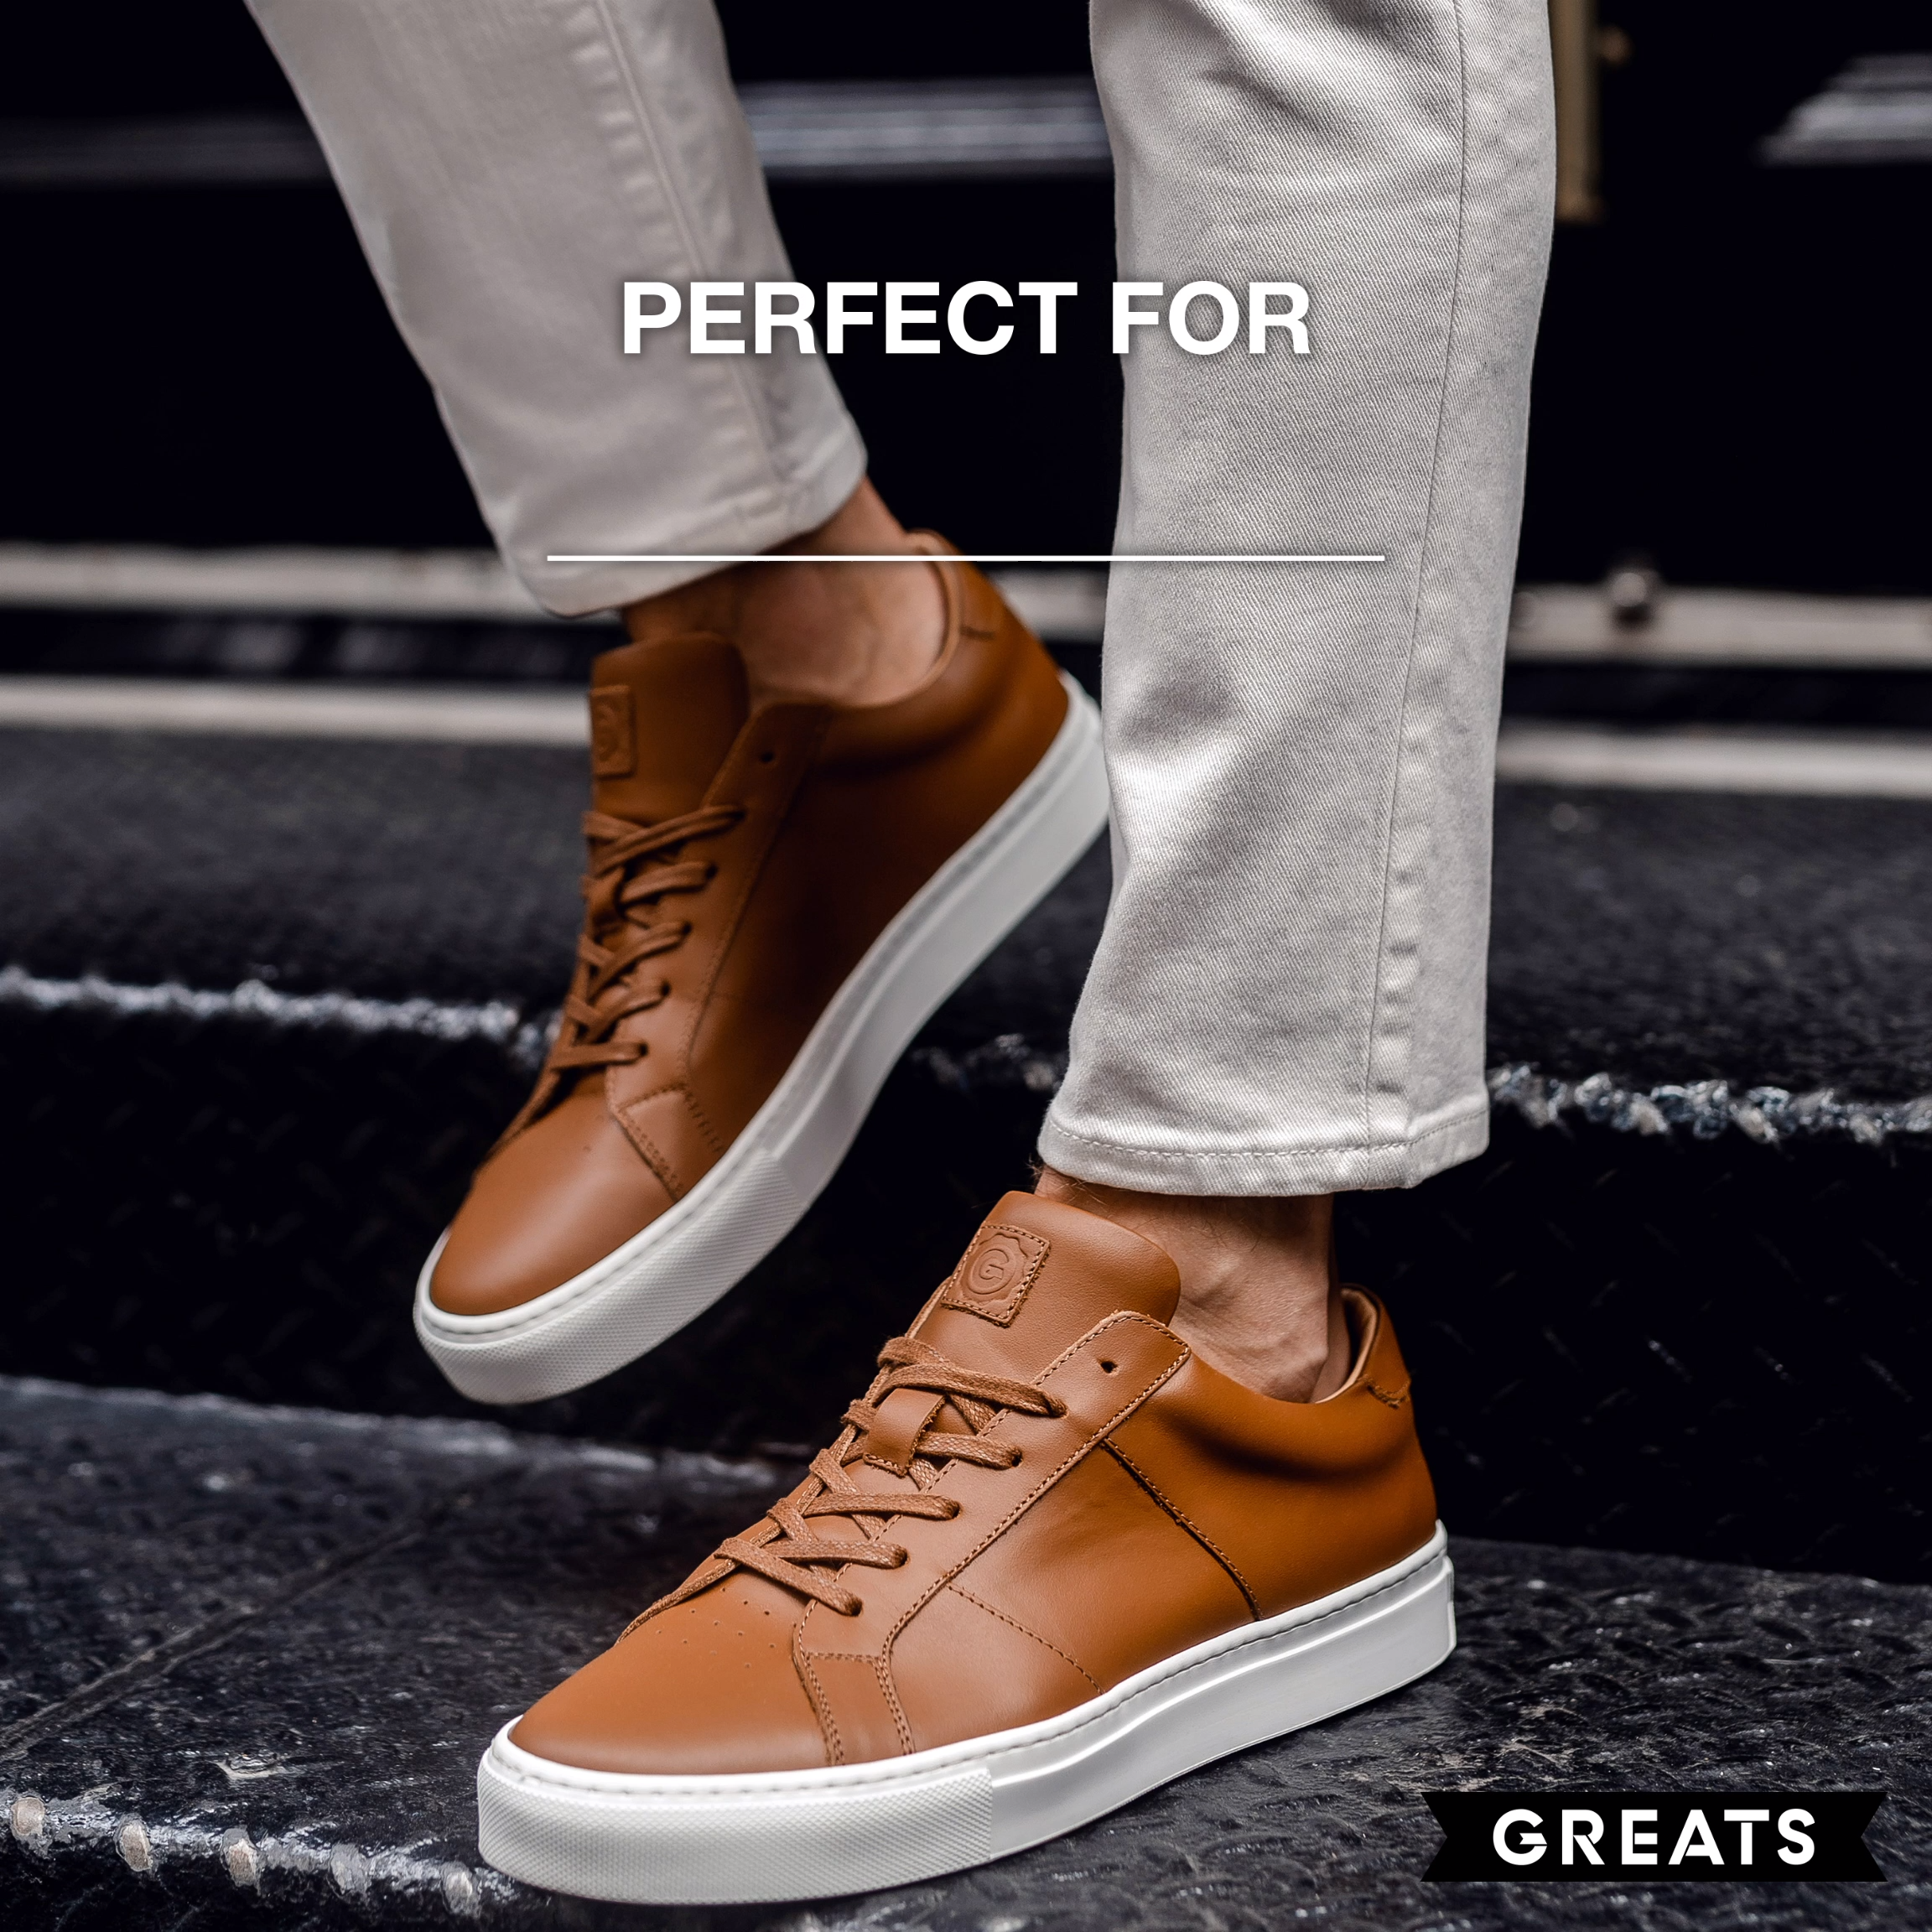 Traffic | Royale Cuoio_Perfect For - Traffic | Royale Cuoio_Perfect For -   19 style Mens shoes ideas